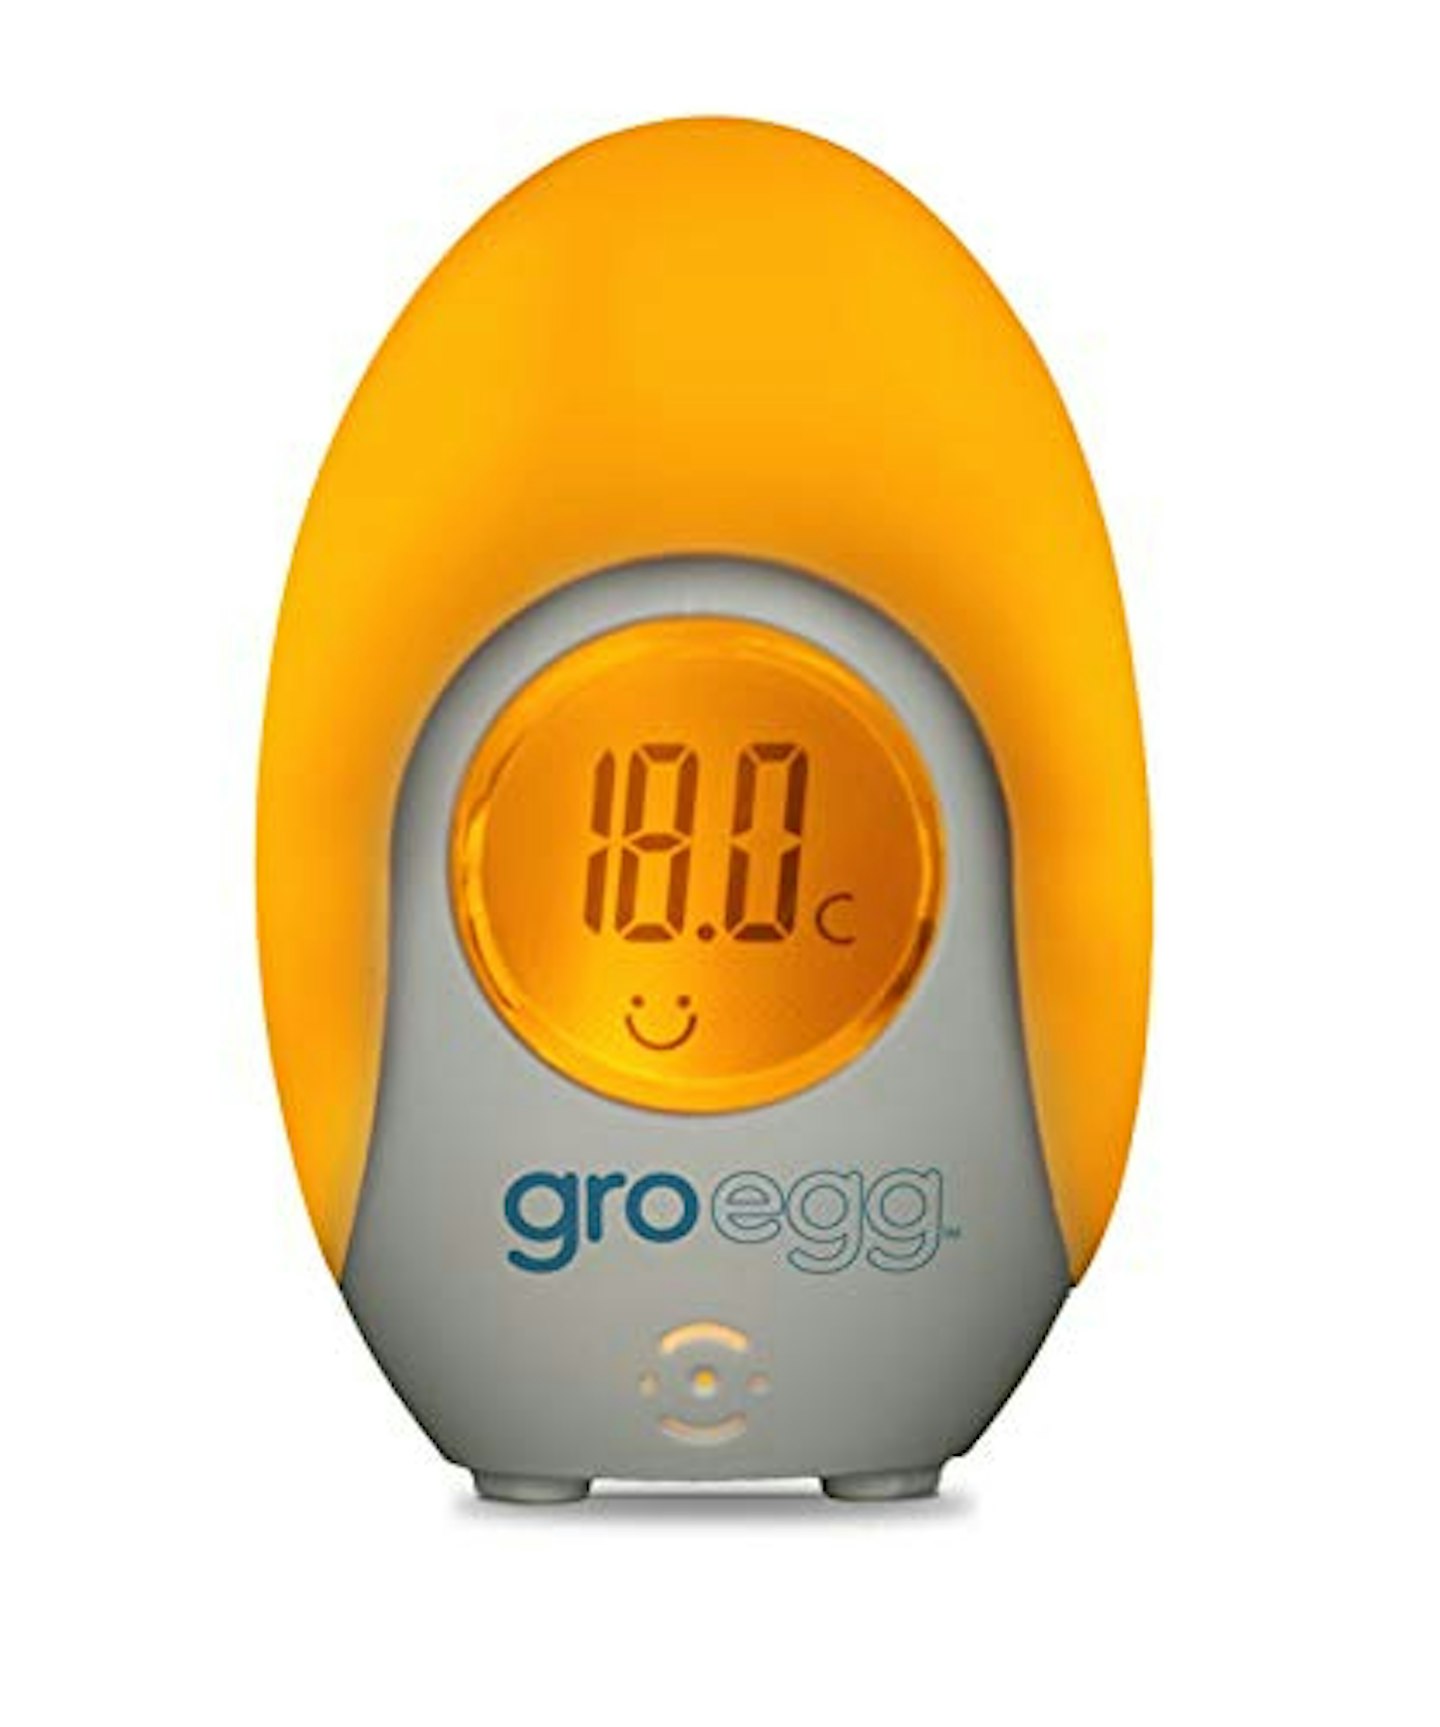 Tommee Tippee Gro-Egg Room Thermometer